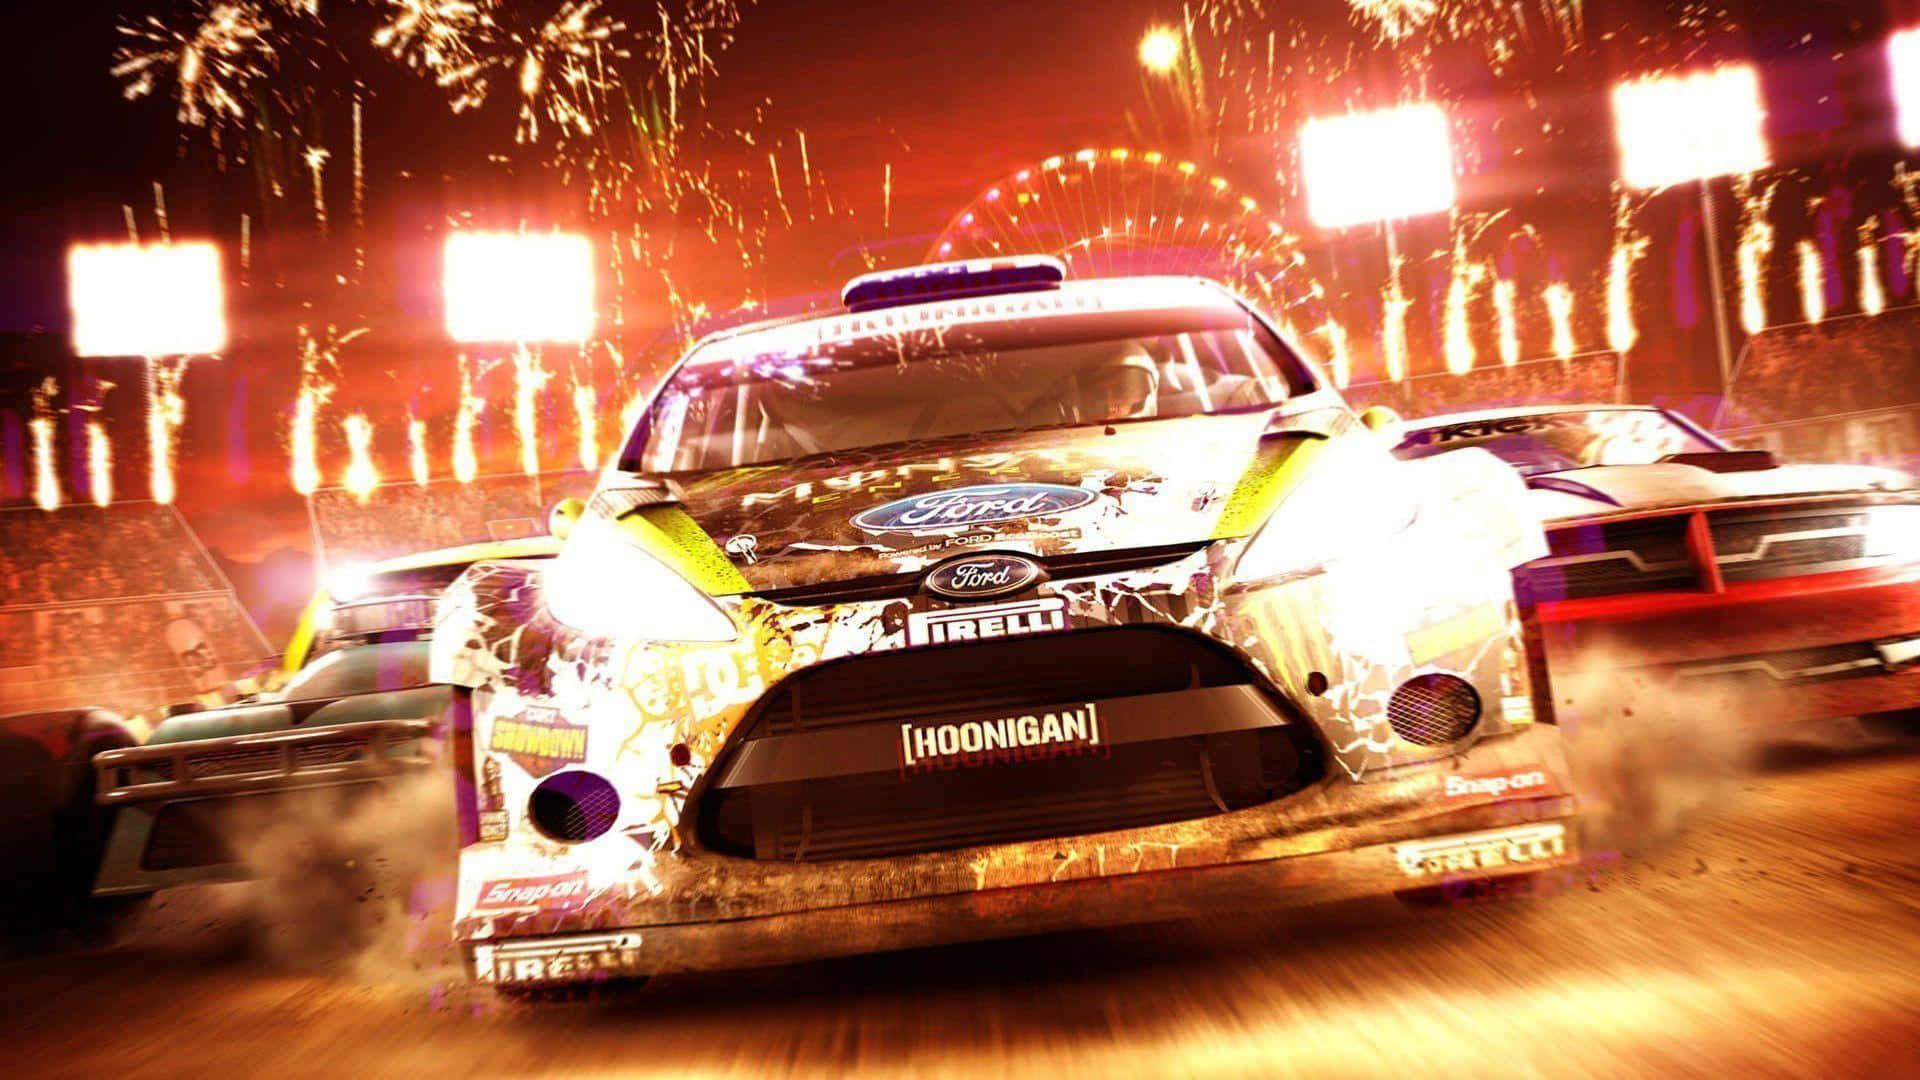 "Race Around the World in Hd Dirt 3!"